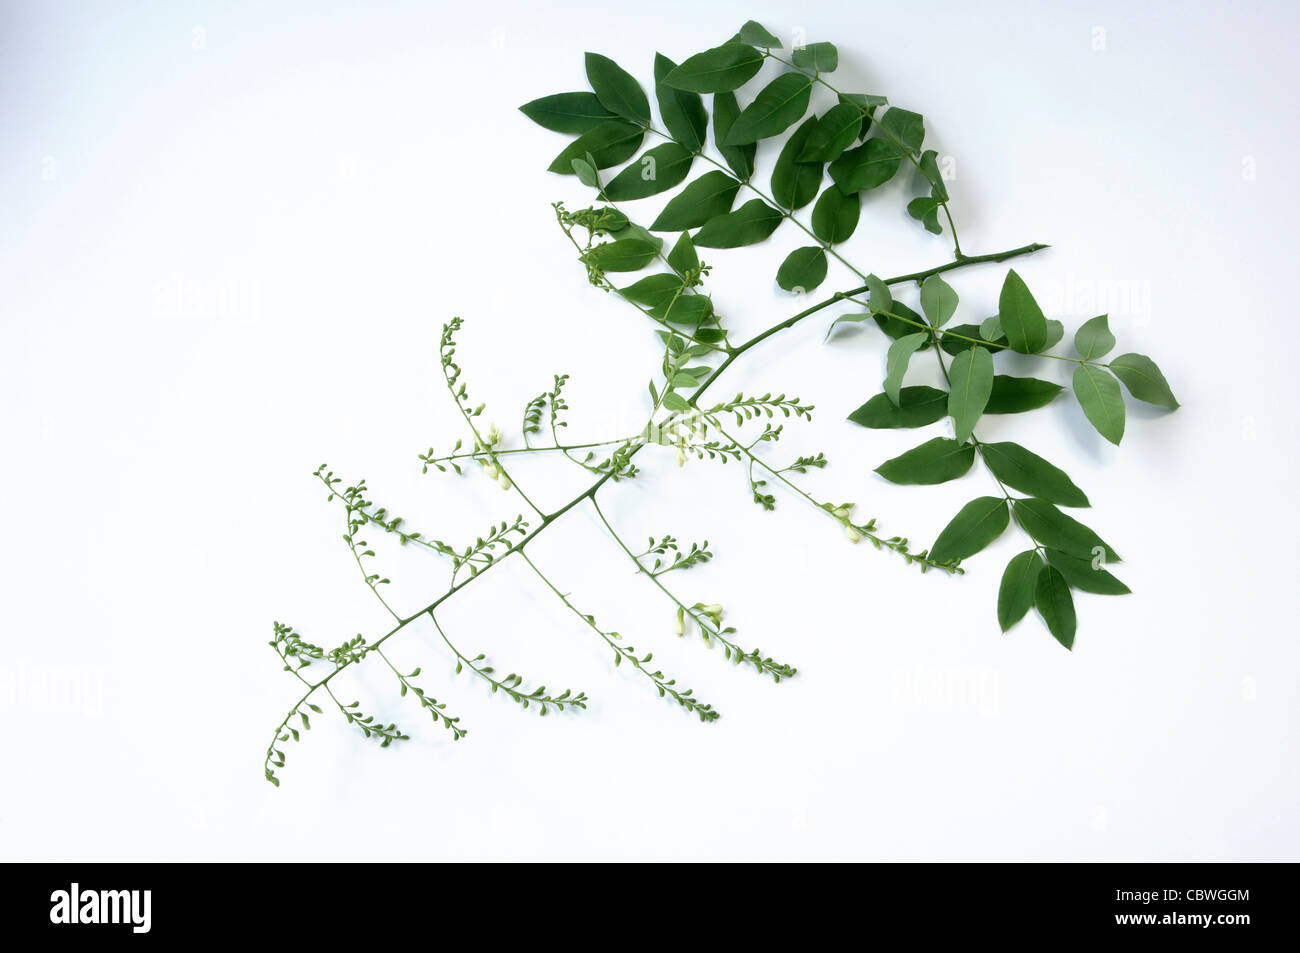 Pagoda Tree (Styphnolobium japonicum, Sophora japonica), flowering twig, studio picture against a white background. Stock Photo